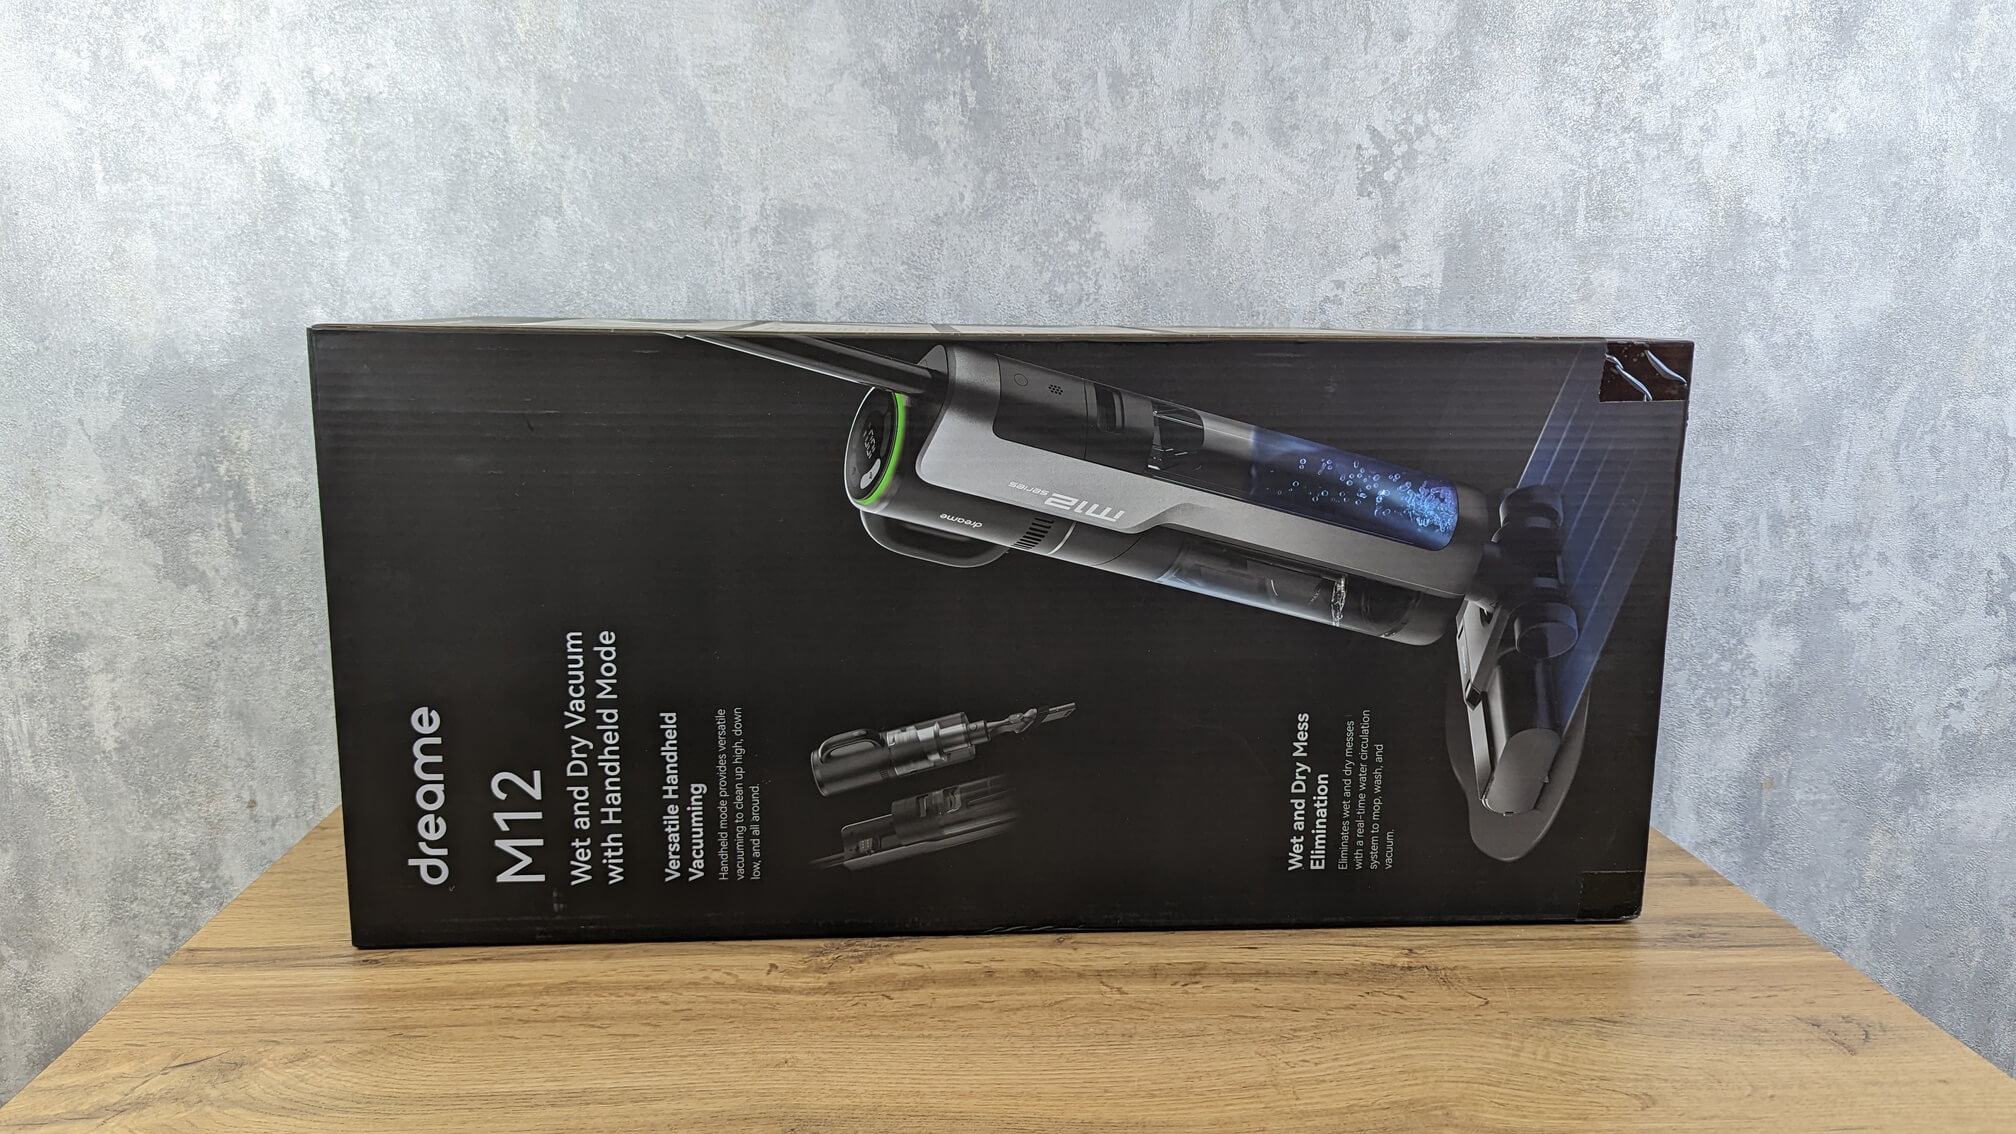 Dreame M12 Review & Test: what is this vacuum capable of?